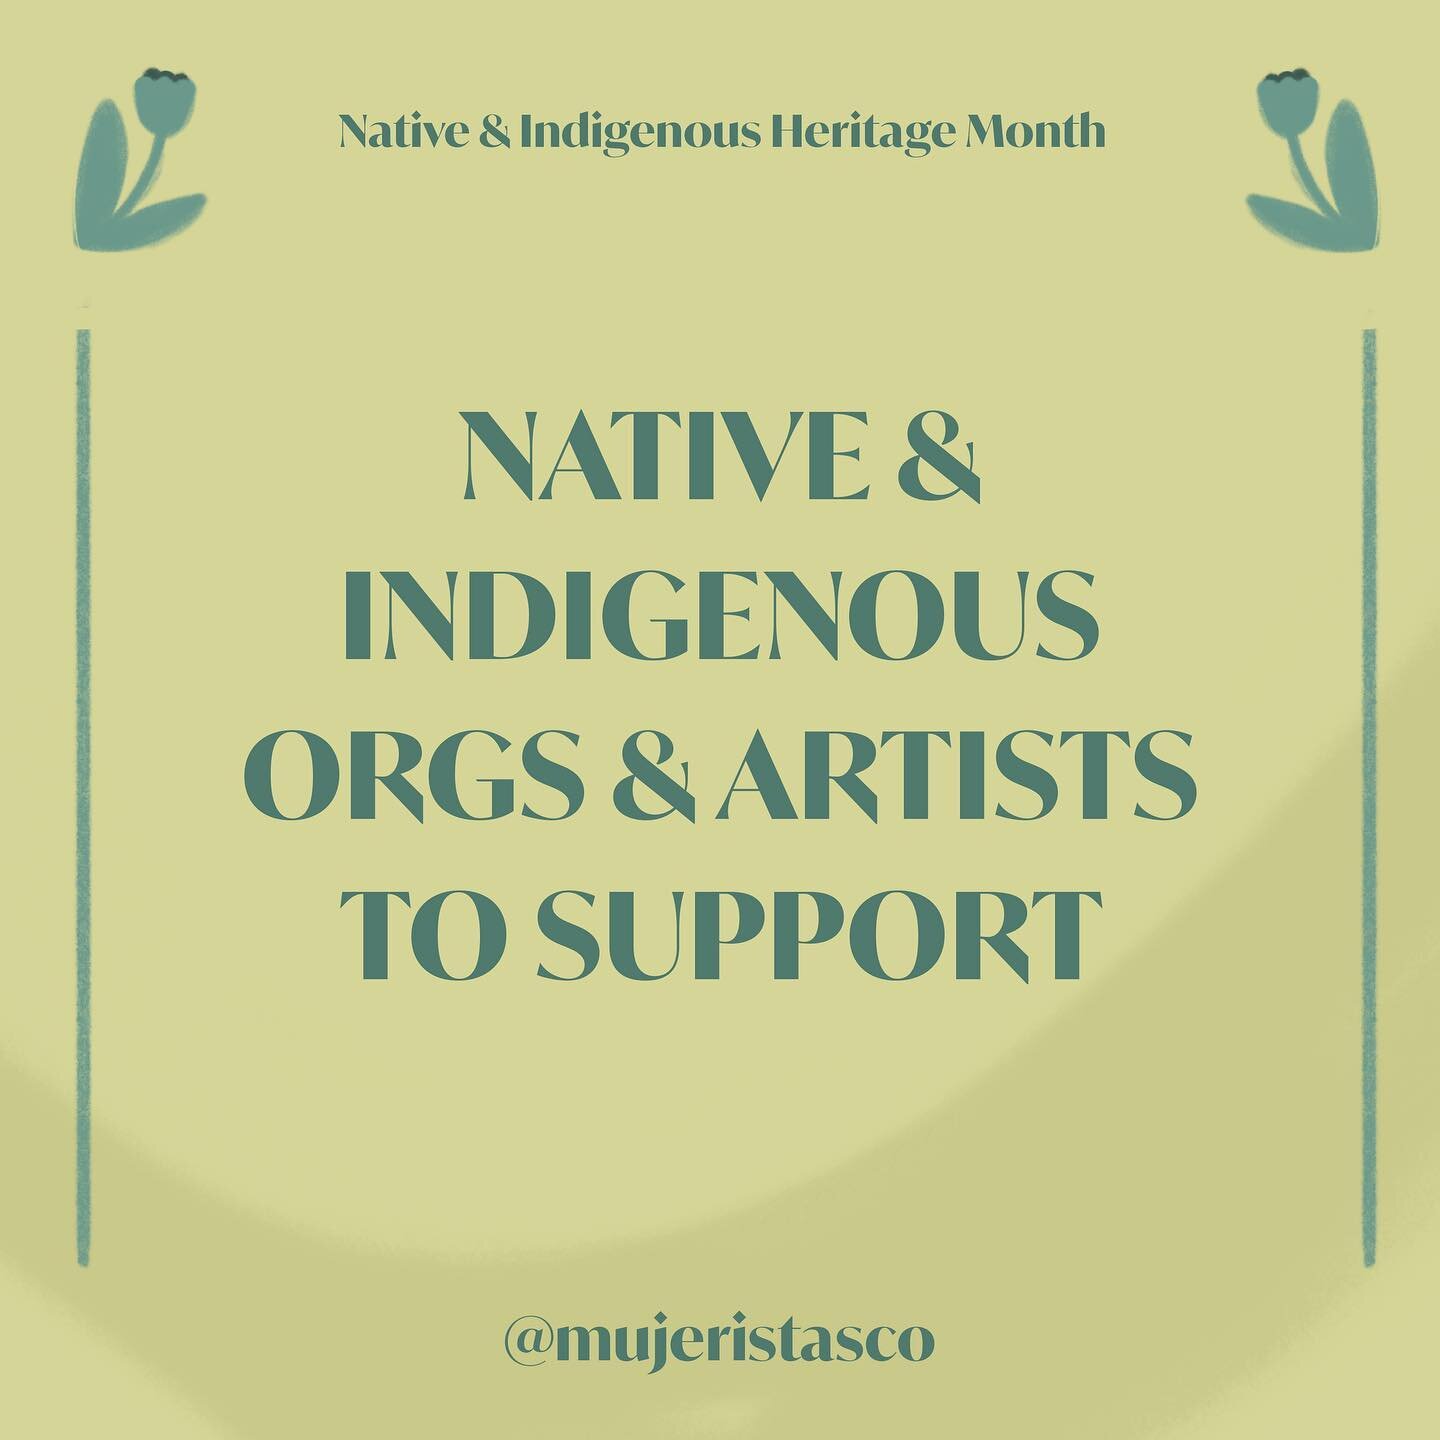 This Native American Heritage Month, we&rsquo;re shouting out some awesome Native and Indigenous advocates and creators 💚 Make sure you show them support and give them a follow!

🌿 @ndncollective 
🍃 @indigenouswomenrising 
🌱 @nicwa1983 
🌿 @wellr